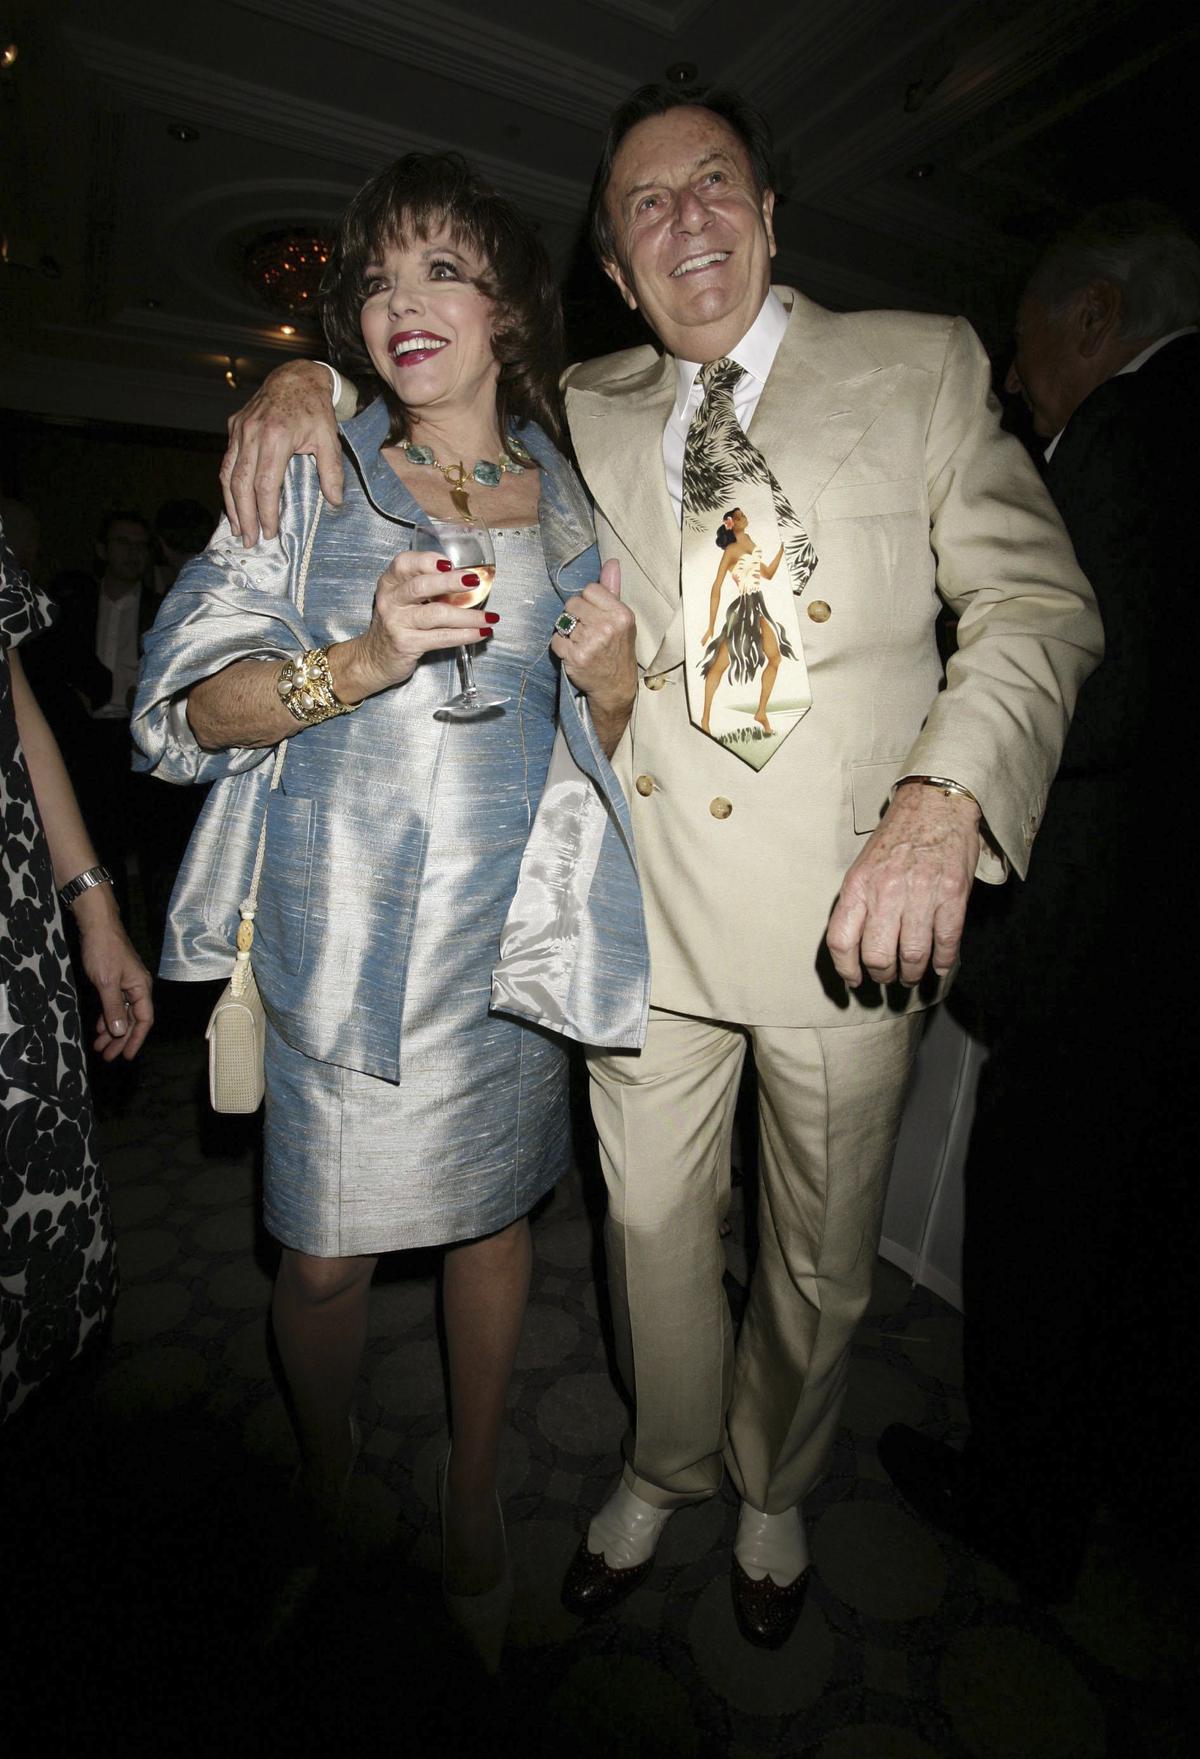 Actress Joan Collins and actor Barry Humphries pose during a party to celebrate the 180th Anniversary of weekly politics magazine The Spectator, held at the Churchill Hyatt Hotel in central London, May 7, 2008. 